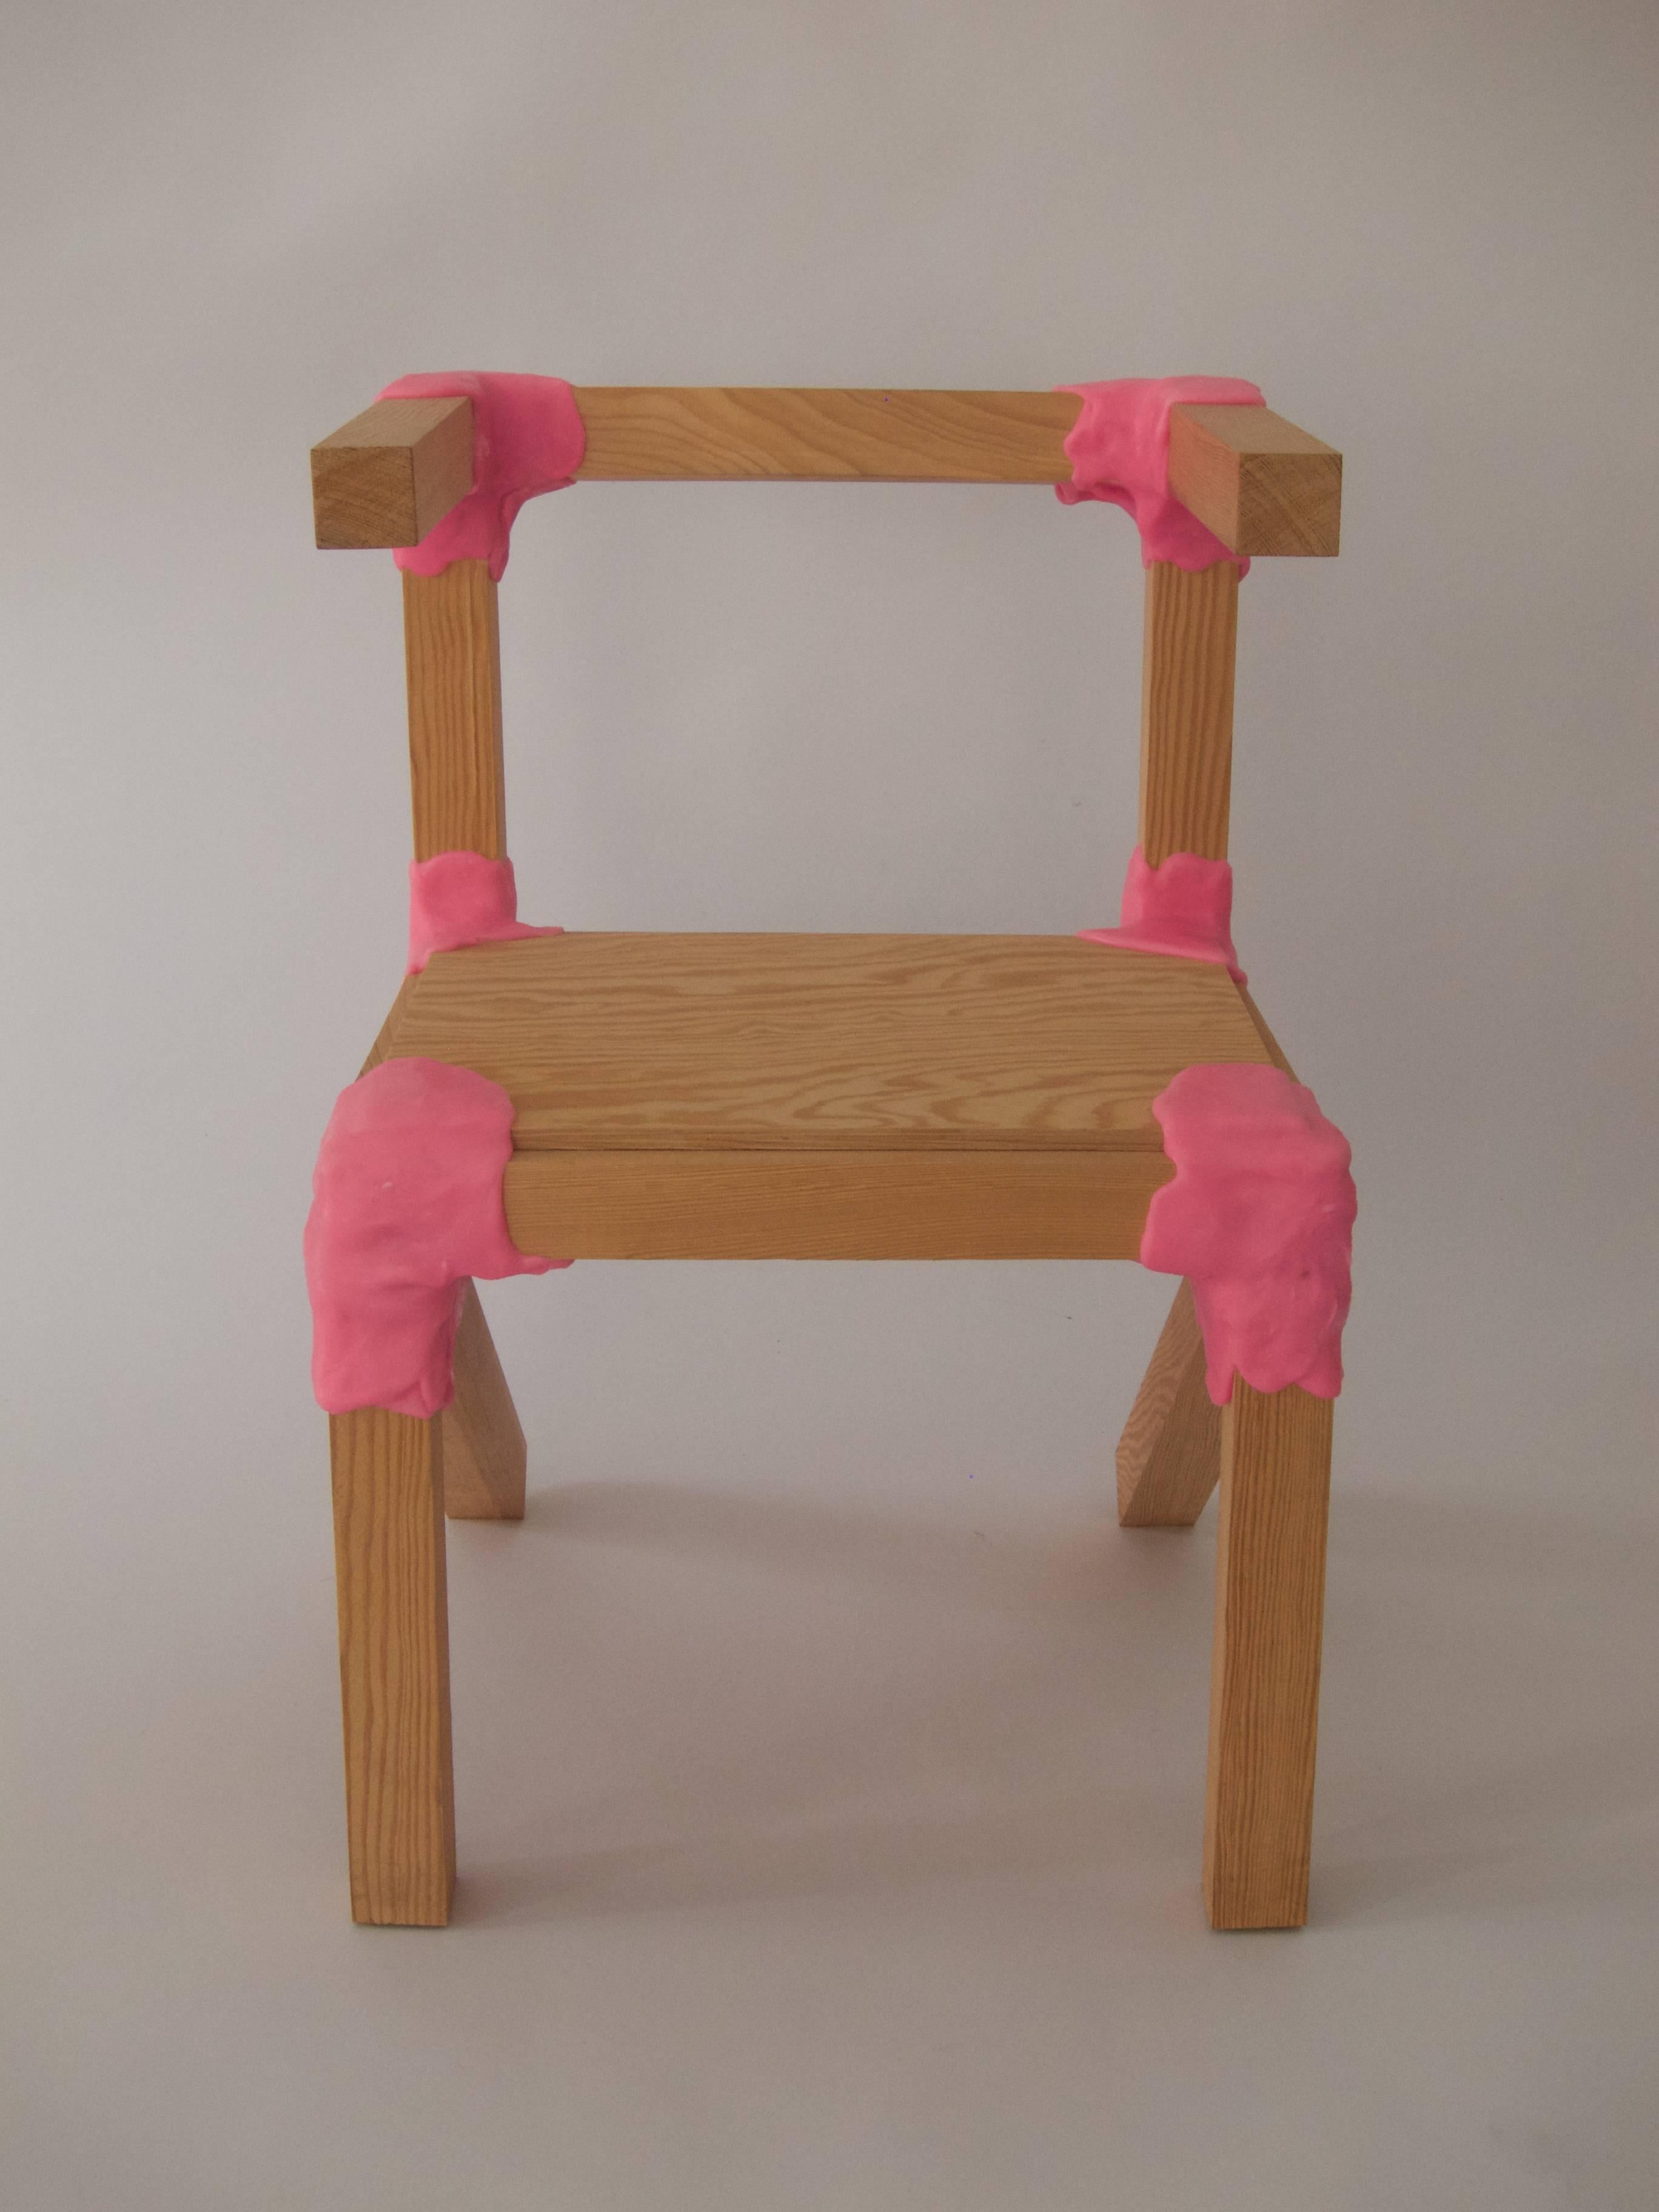 Rare ”Amateur Workshop” chair for kids by Jersey Seymour
wood, pink polycaprolactone wax (thermoplastic synthetic material),
Germany, 2009-2010.

37 x 37 cm, h 55 cm, seat height 43 cm; 14,56 x 14,56 in, h 21,65 in, seat height 16,92 in